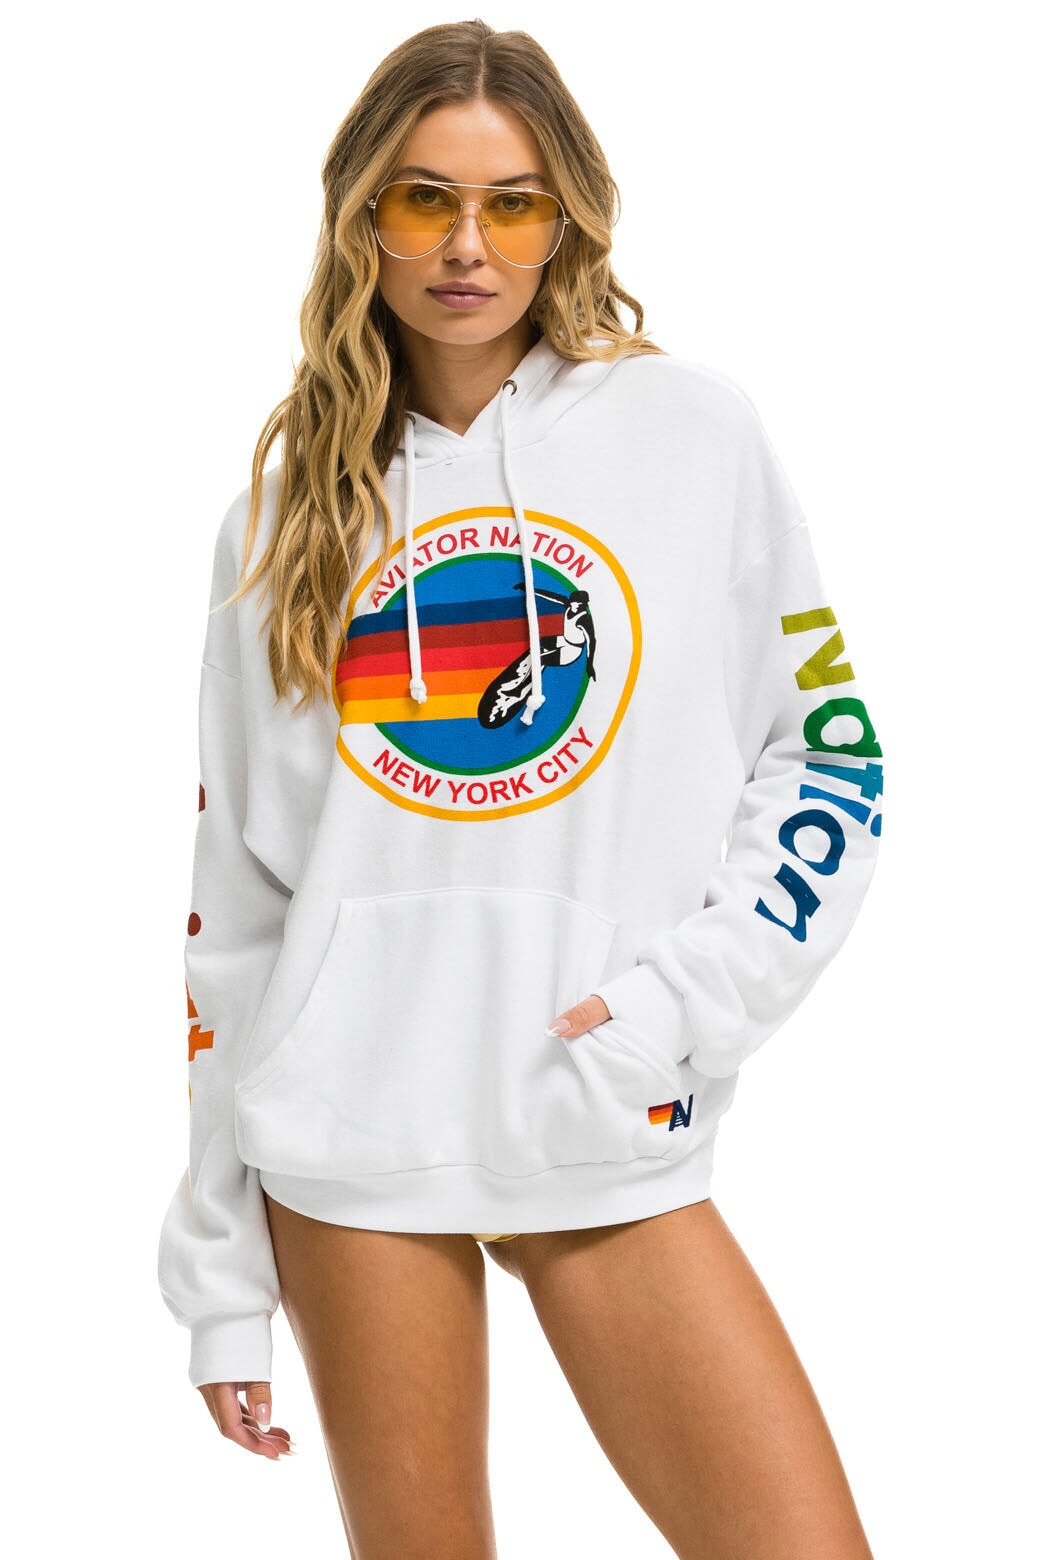 AVIATOR NATION NEW YORK CITY RELAXED PULLOVER HOODIE - WHITE - Aviator  Nation